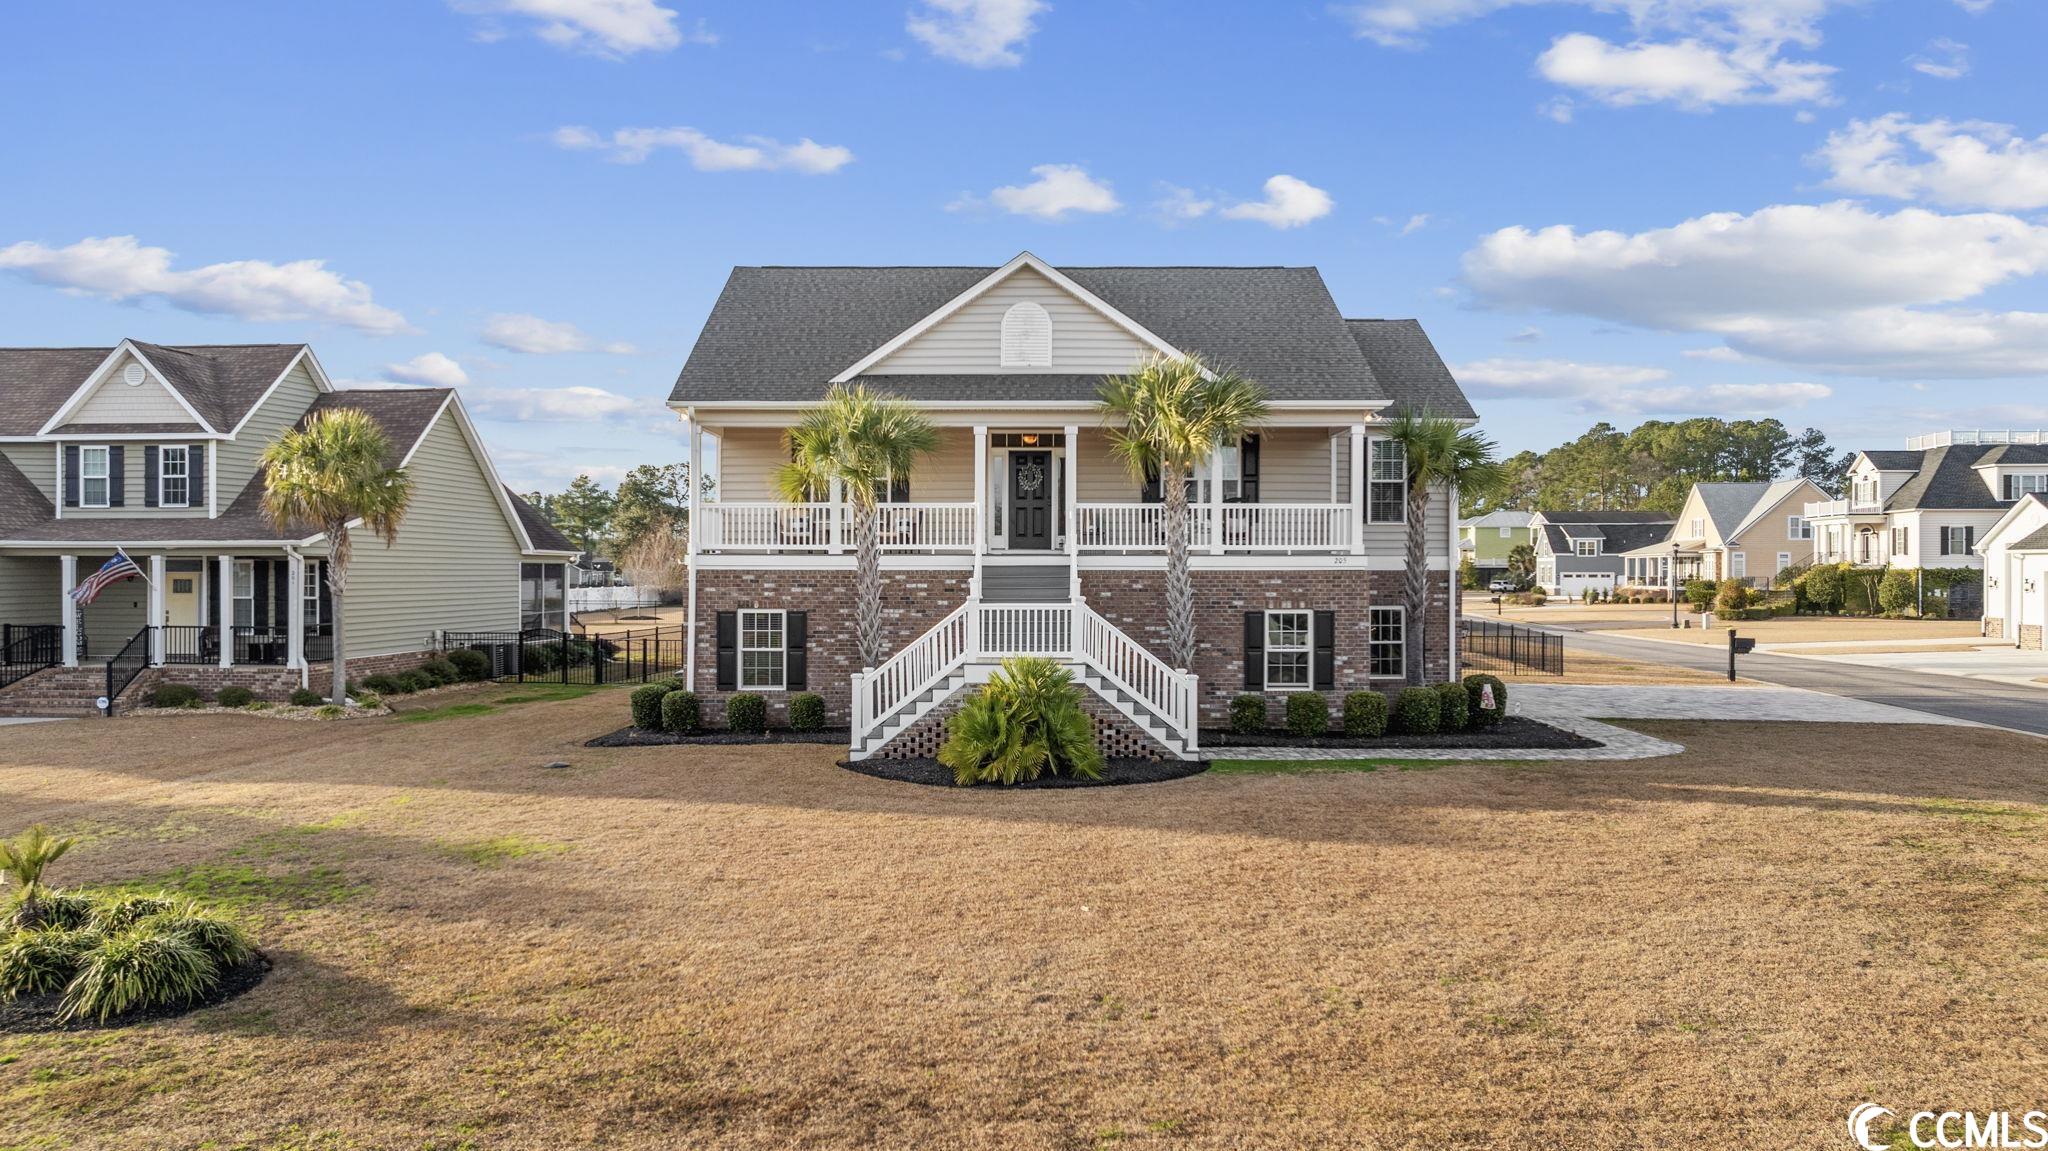 welcome to one of conway's finest, gated, riverfront communities, pottery landing. this exquisite, 4 bedroom, 3 and-a-half bath home is everything you could wish for a beautiful 1/2 acre homesite! the double sided stairs leading up to the large front porch gives this home the perfect curb appeal. as you enter the home you will see the naturally-lit formal dining room with double box tray ceilings. a cozy but spacious living room that leads you to the kitchen or out the coastal style doors to the rear balcony. the kitchen offers upgraded cabinets, granite countertops, smudge proof stainless steel appliances, a spacious two sided breakfast bar with an open view of the living area and a casual dining area. the large owners suite with presidential tray ceilings & more natural light - this master has it all. additionally, you'll find a large walk-in closet, double executive height vanities with ample counter space, ceramic tile shower with a glass door and separate soaker tub to relax and unwind. plenty of storage space in the large laundry room that includes a closet. head downstairs to the den/media flex room/office that leads you to the other 3 bedrooms. enjoy the backyard oasis from here! an outdoor kitchen, covered rear porch, custom pool, travertine surround, and exquisite backyard awaits you! this home is an entertainers dream spot. indulge into your community the neighborhood furnished clubhouse and pool. head down to the neighborhood boat ramp with direct access to the waccamaw river, minutes from the intercostal waterway!